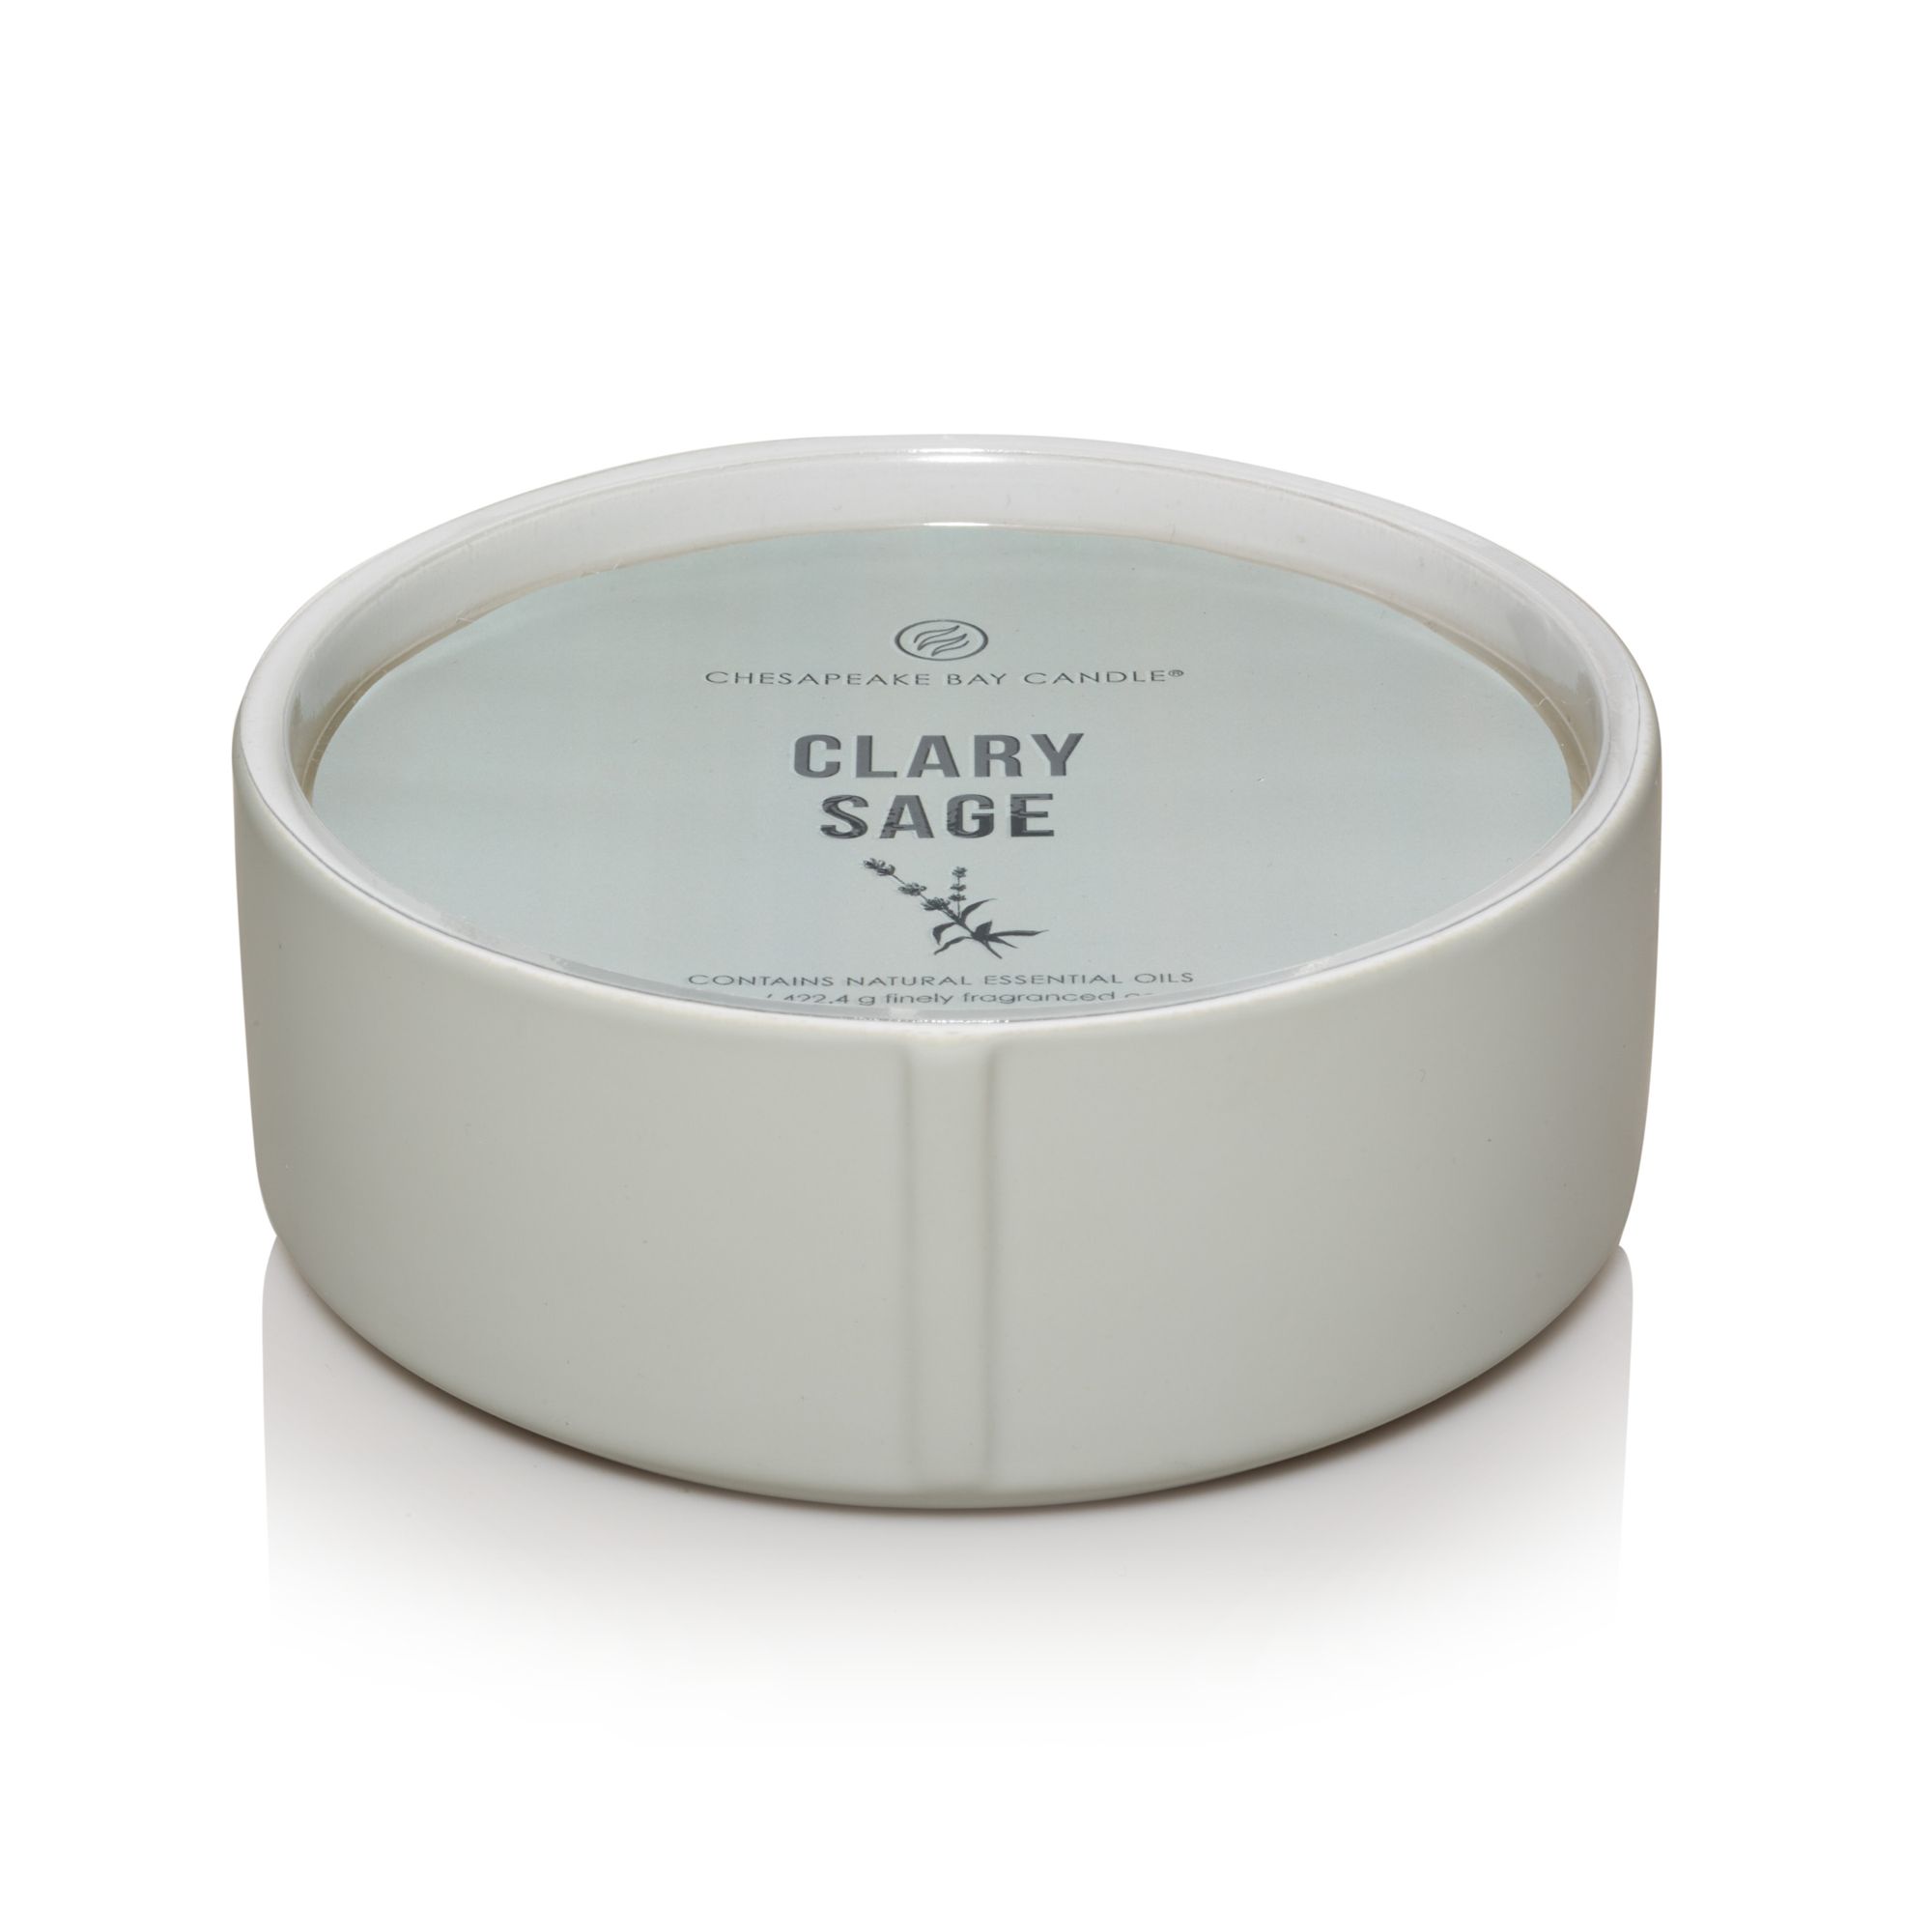 Chesapeake Bay Candle Minimalist Collection Clary Sage - 14.9oz Soft-Touch 3-Wick Ceramic Candle | Walmart (US)